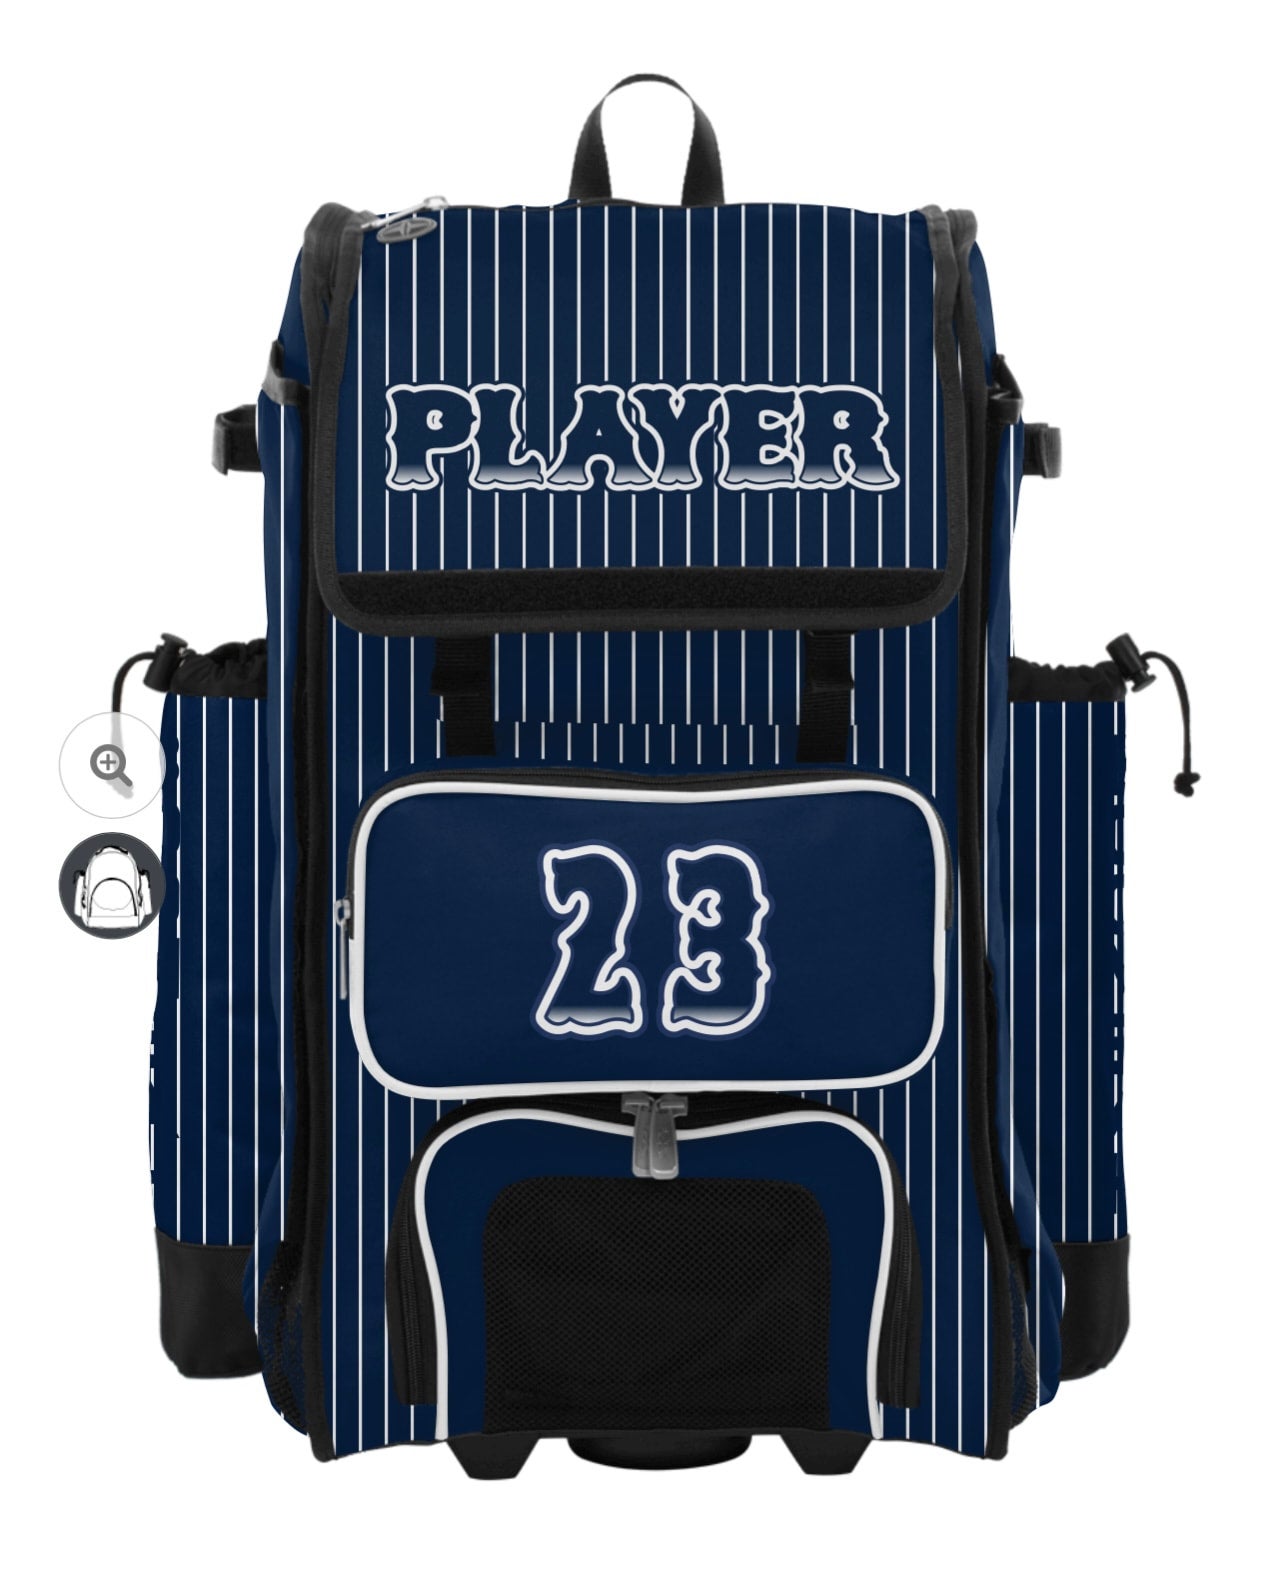 Boombah Inc  Weve got new designs for our Superpack Rolling Bat Bag 20  The new bag is focused on increased durability longevity and of course  style Check them out today httpswwwboombahcomusproducthtmlitem338275      